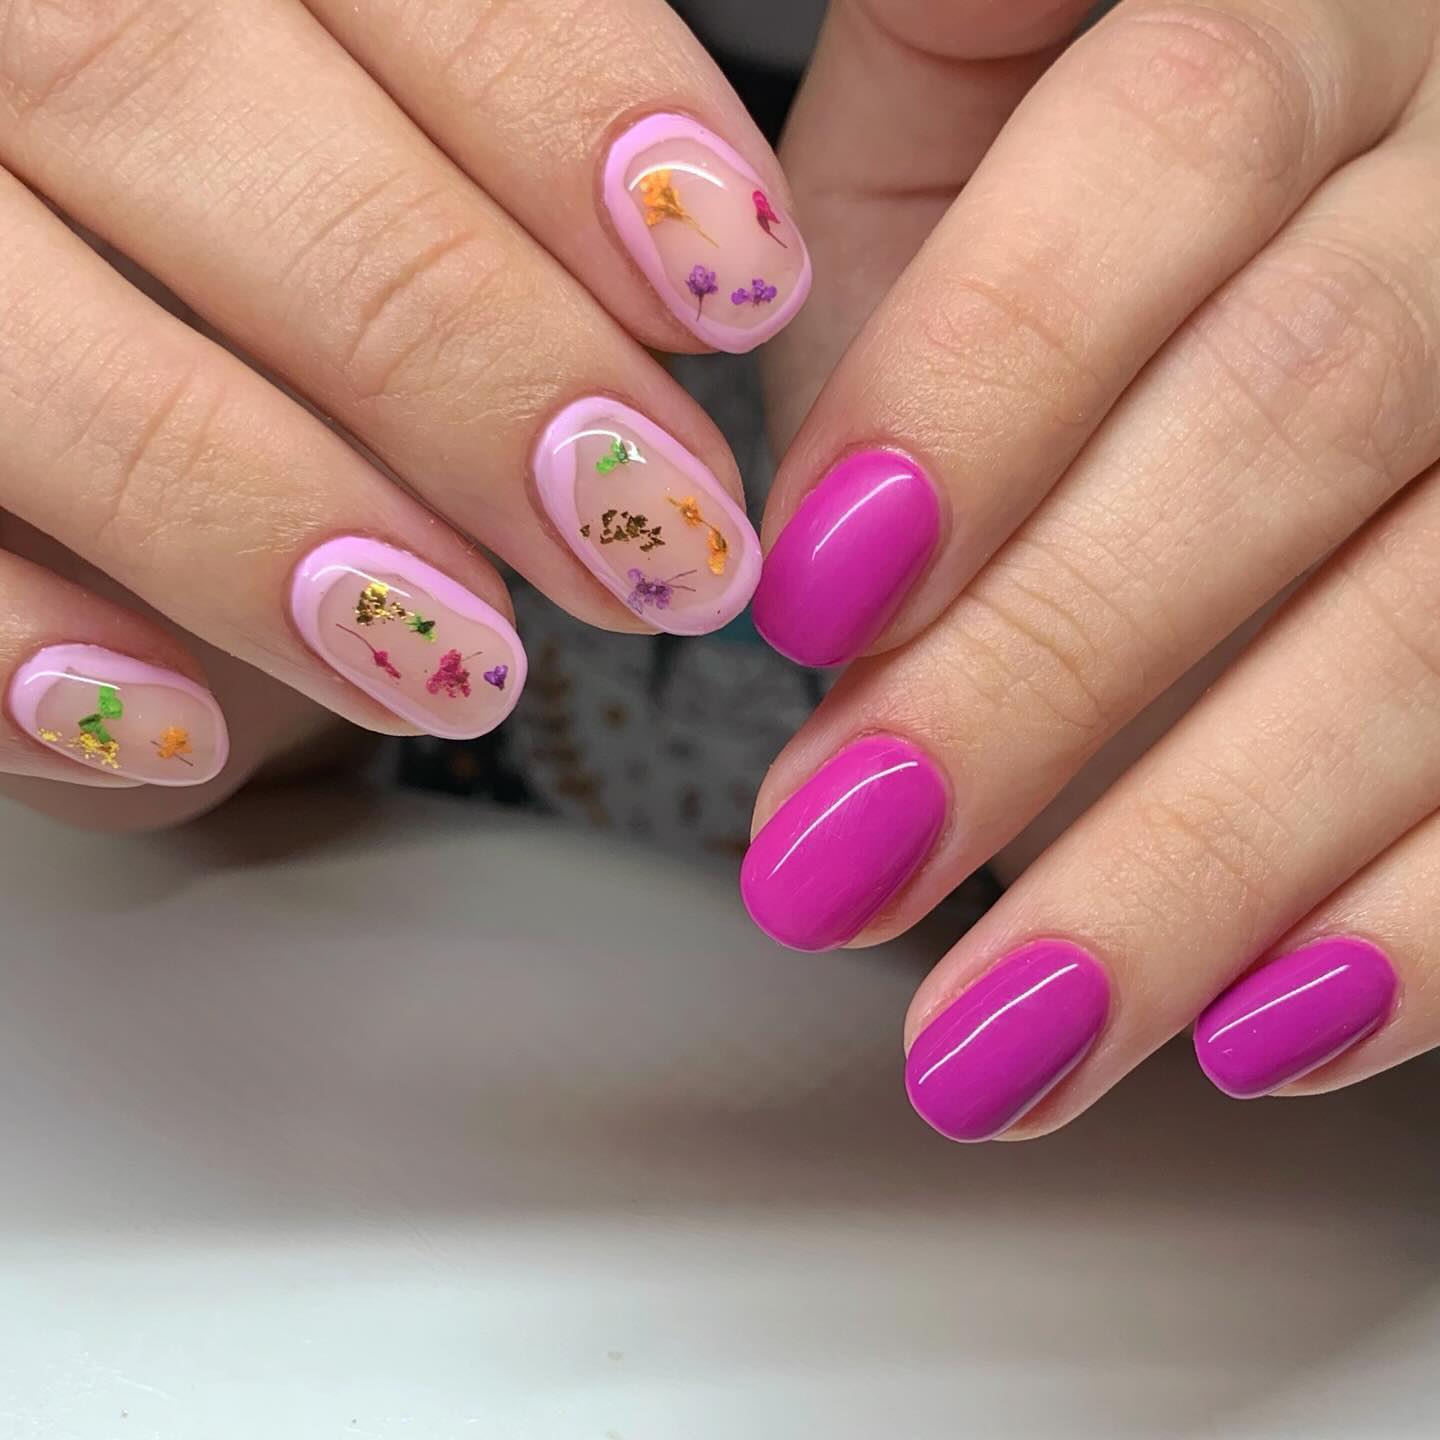 100 Of The Best Spring Inspired Nail Designs images 21